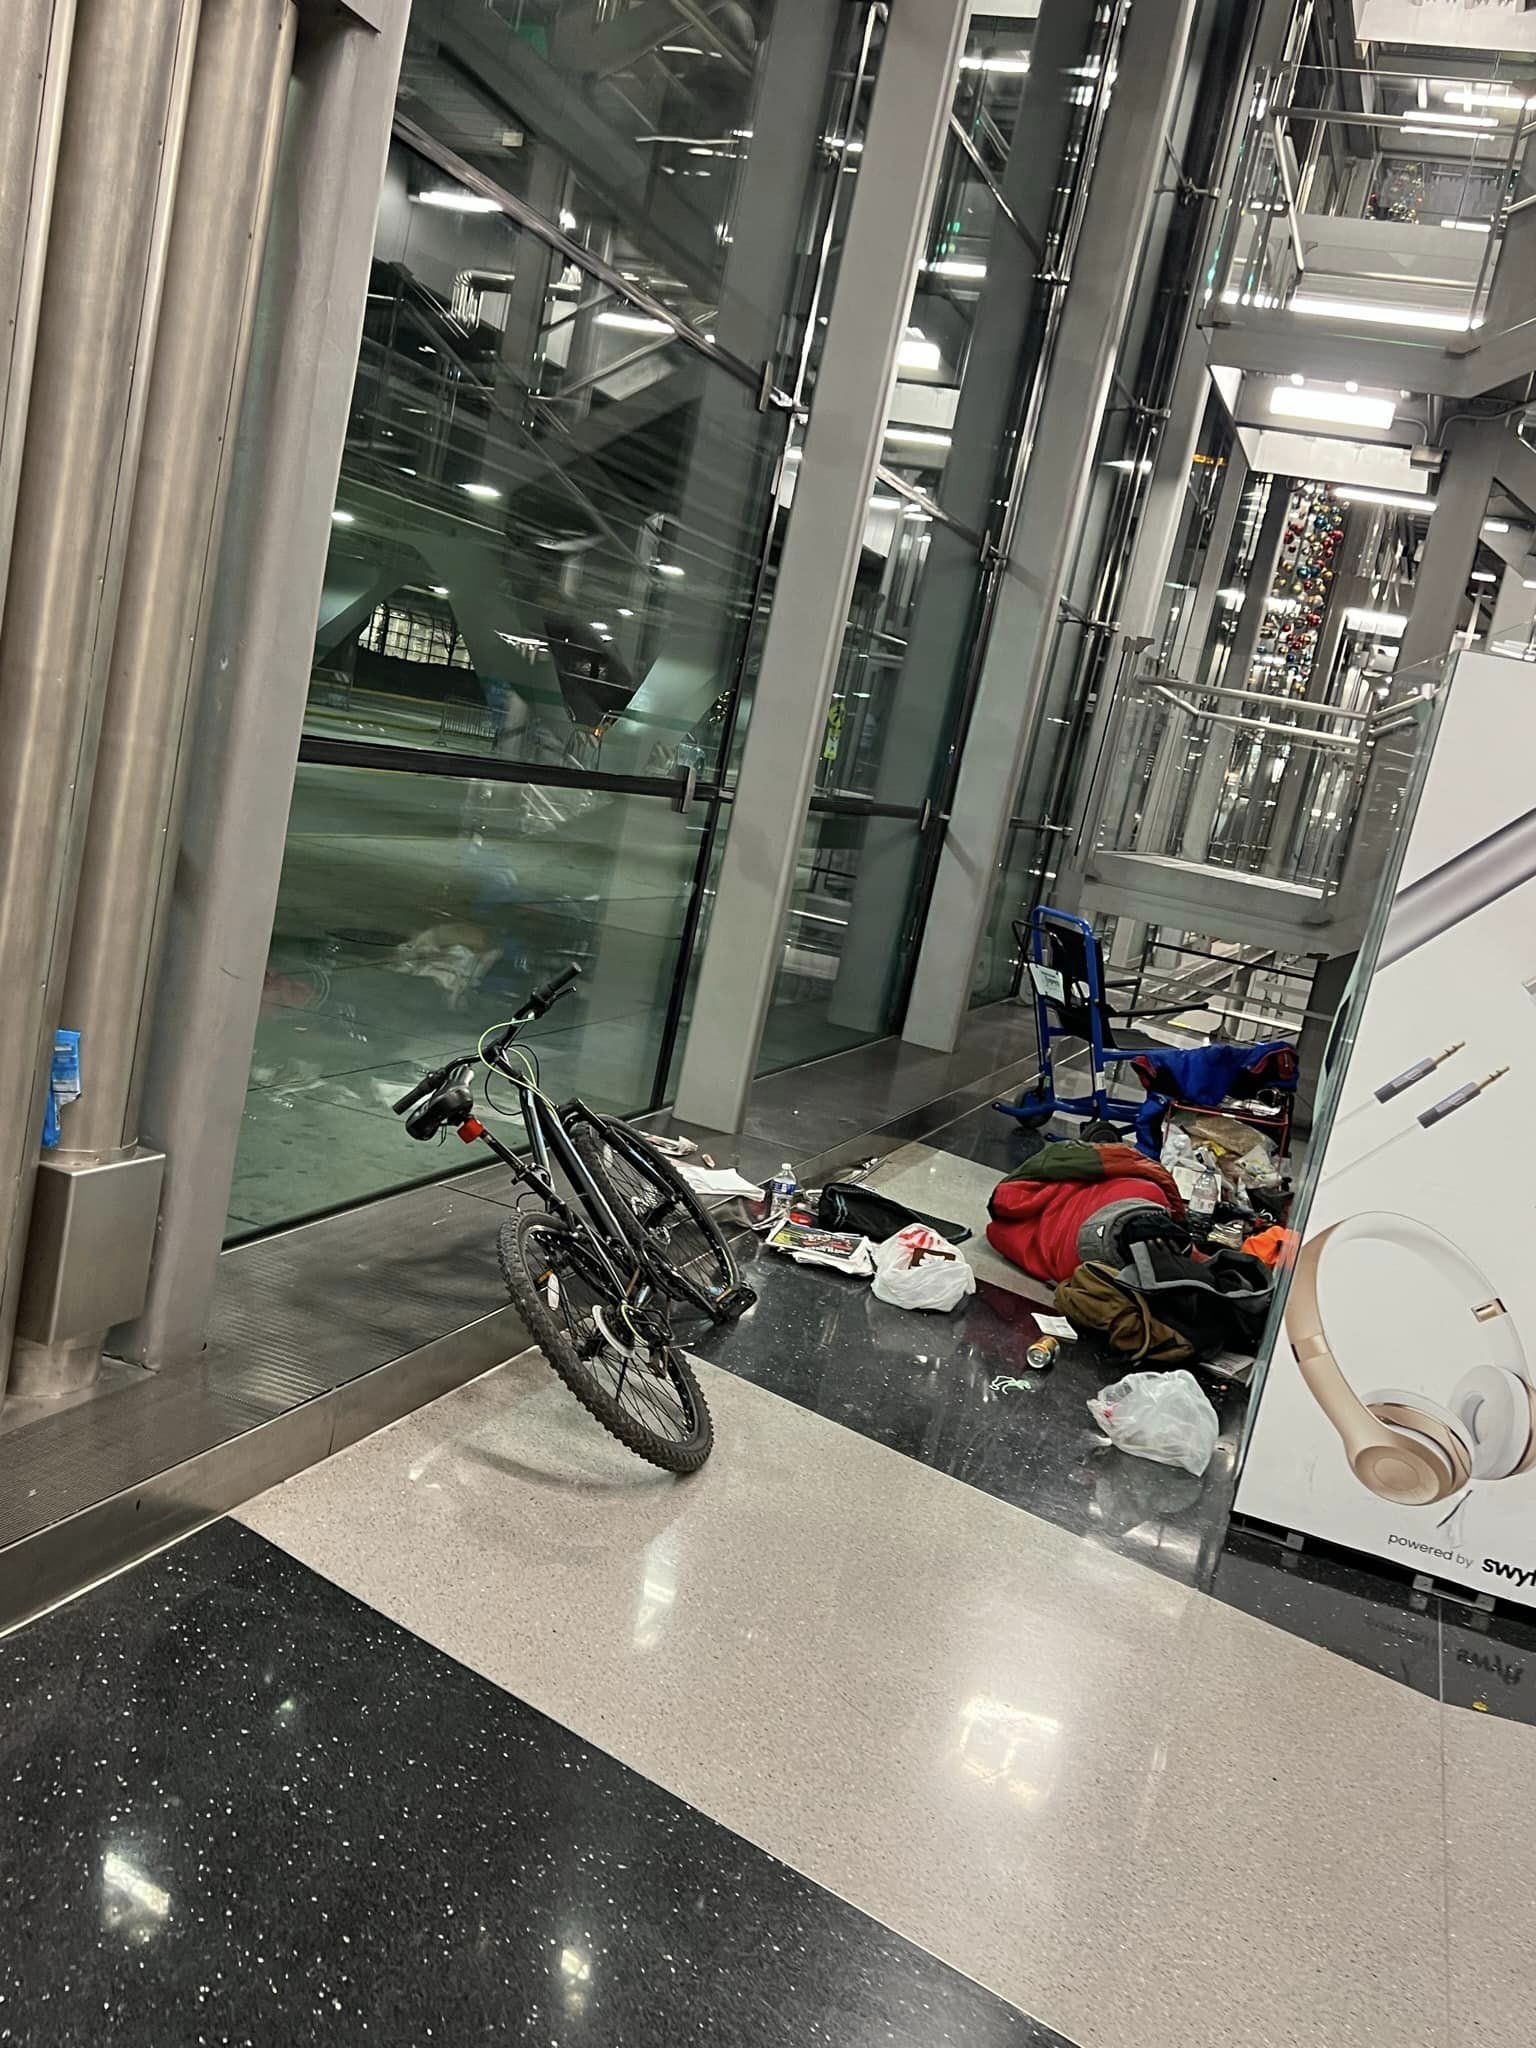 ‘Dystopian’ homeless encampments overtake Chicago’s O’Hare Airport